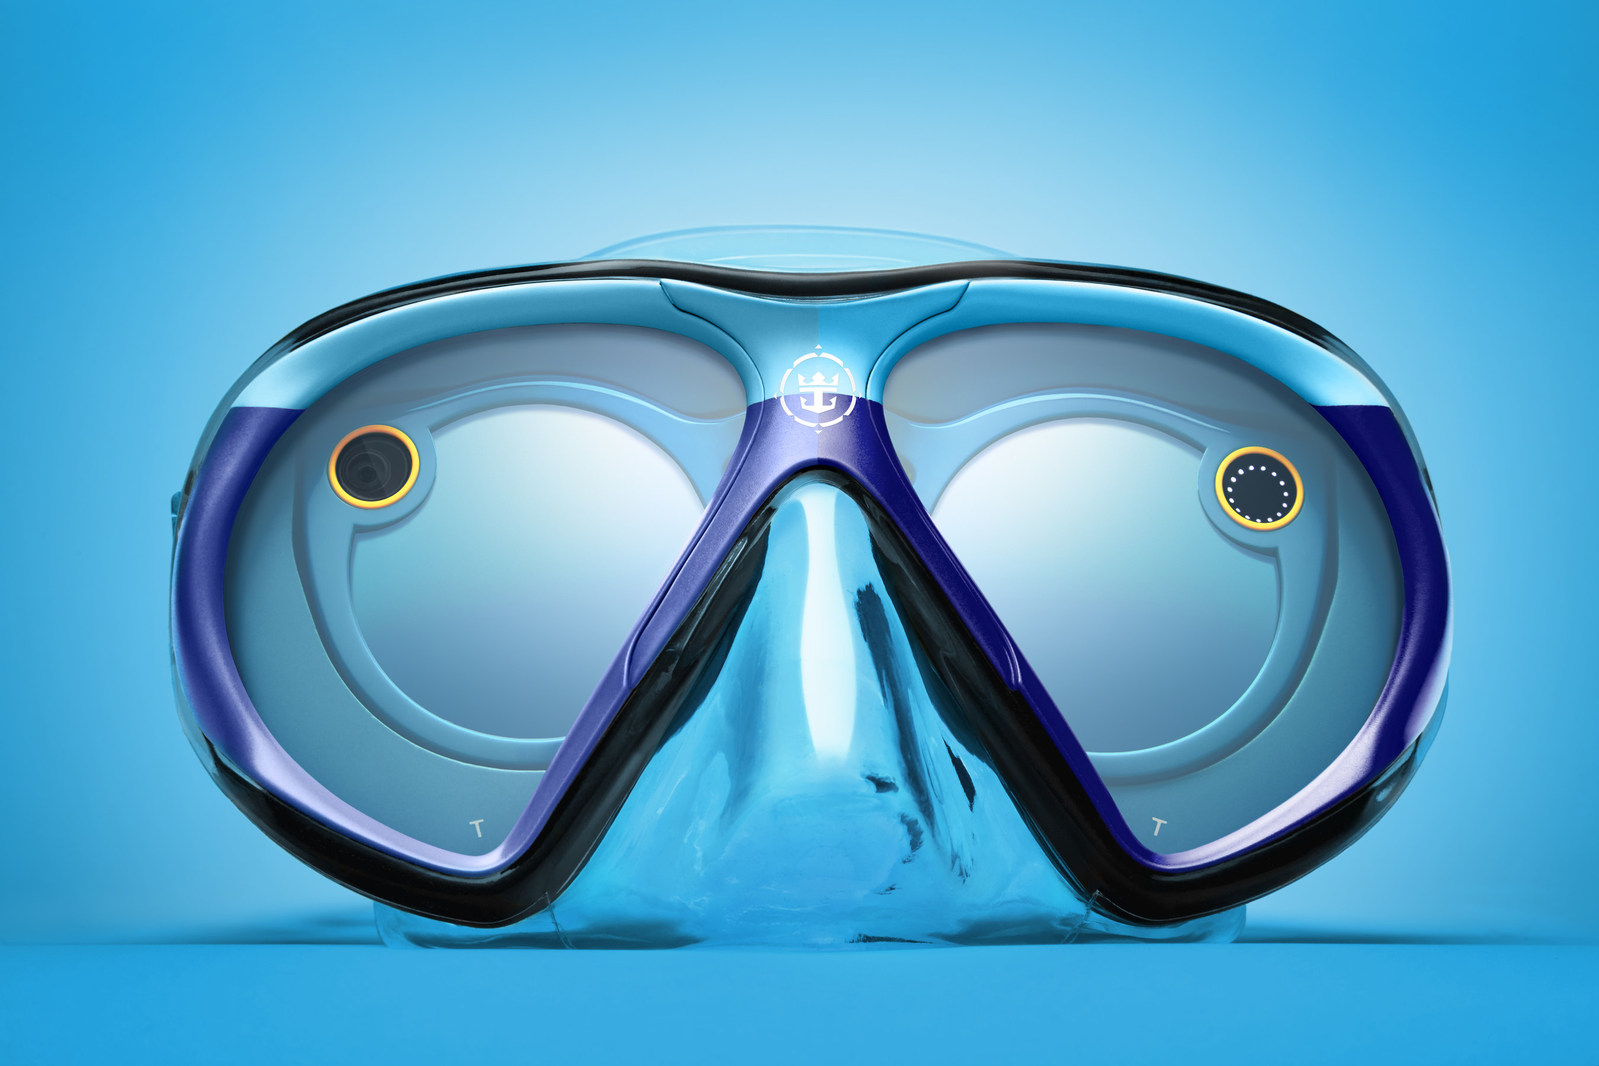 From June 21 to June 25, Royal Caribbeanï¿½s Snapchat channel will immerse viewers in a one of-a-kind underwater adventure thanks to a custom-designed scuba mask dubbed ï¿½SeaSeekers.ï¿½ The mask was custom engineered by the cruise line for use with Snapchat Spectacles. It allows the wearer to snap while underwater and will give those above the surface a unique perspective into the intriguing underwater world of marine life. Fans can #SeekDeeper by following @RoyalCaribbean on Snapchat. (PRNewsfoto/Royal Caribbean)